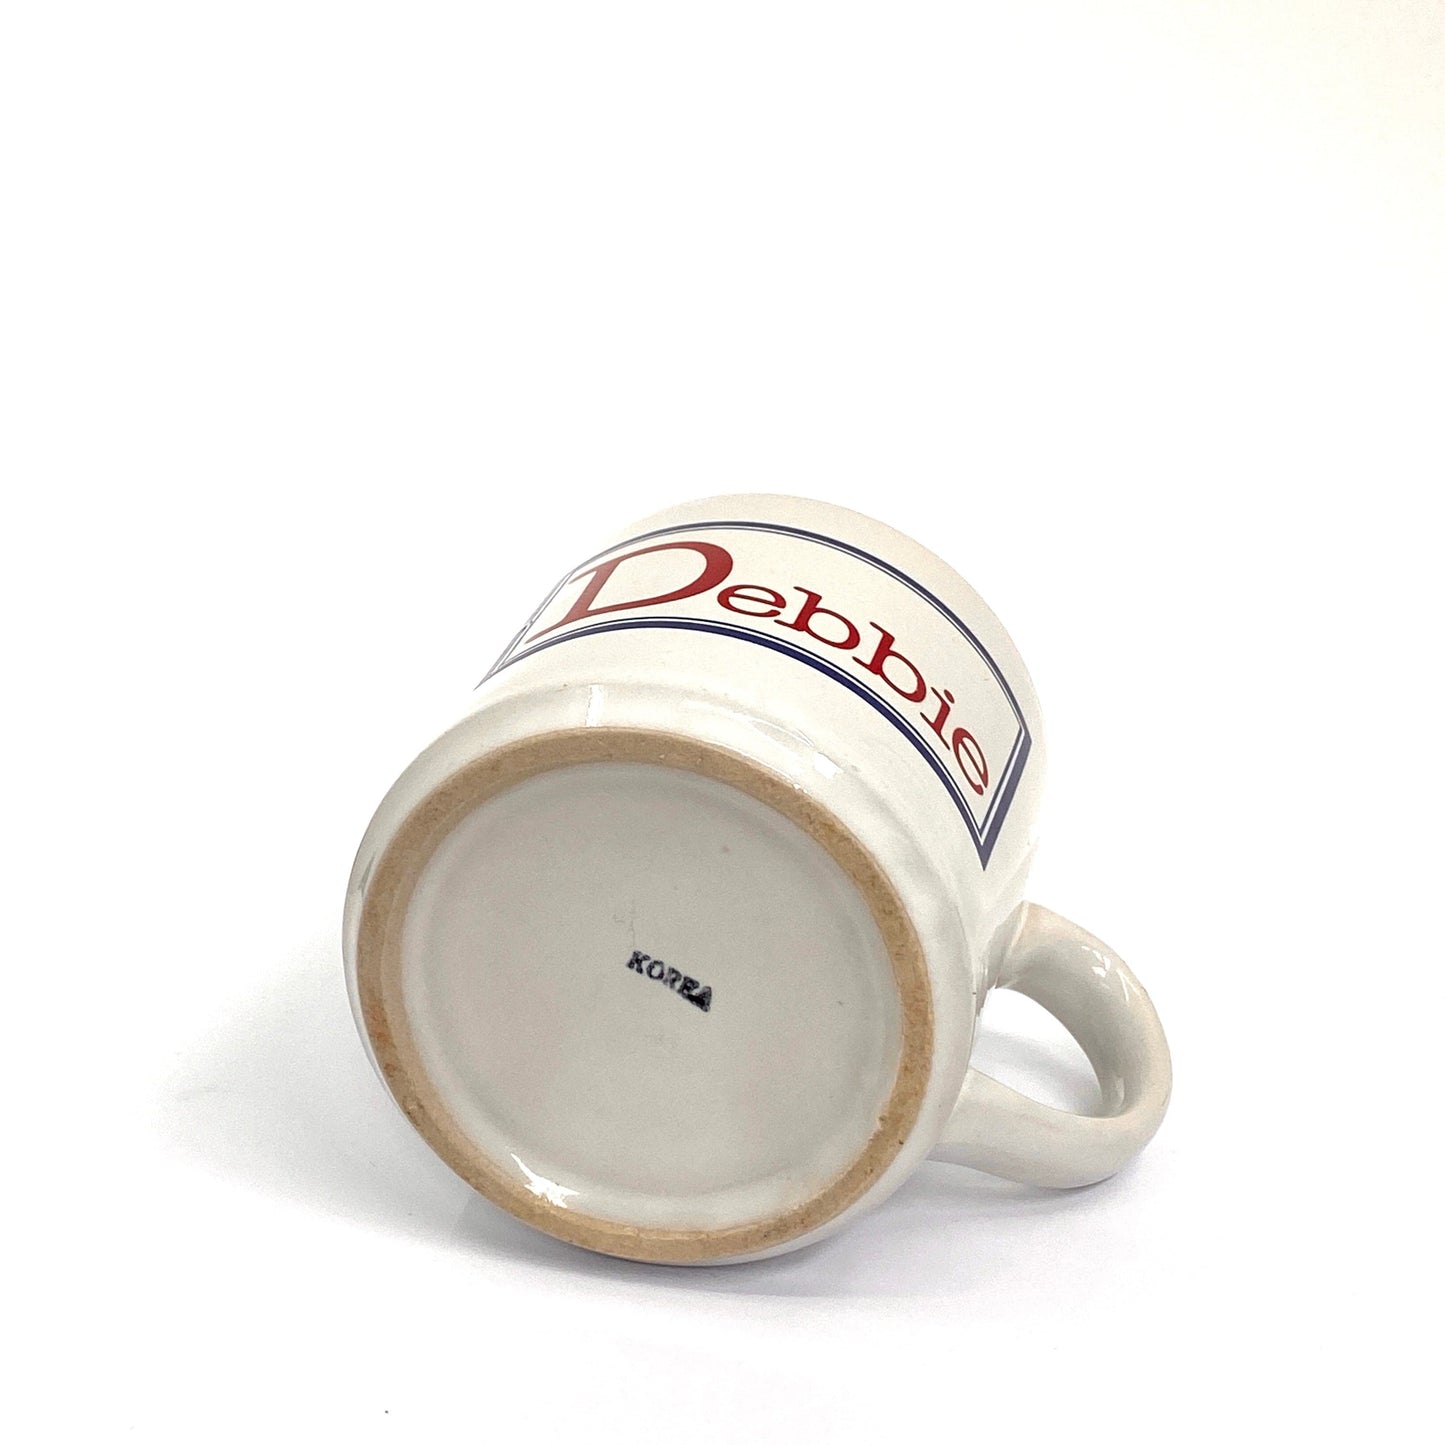 ‘Debbie with a capital D’ White Ceramic Personalized Coffee Cup 14 Fl Oz